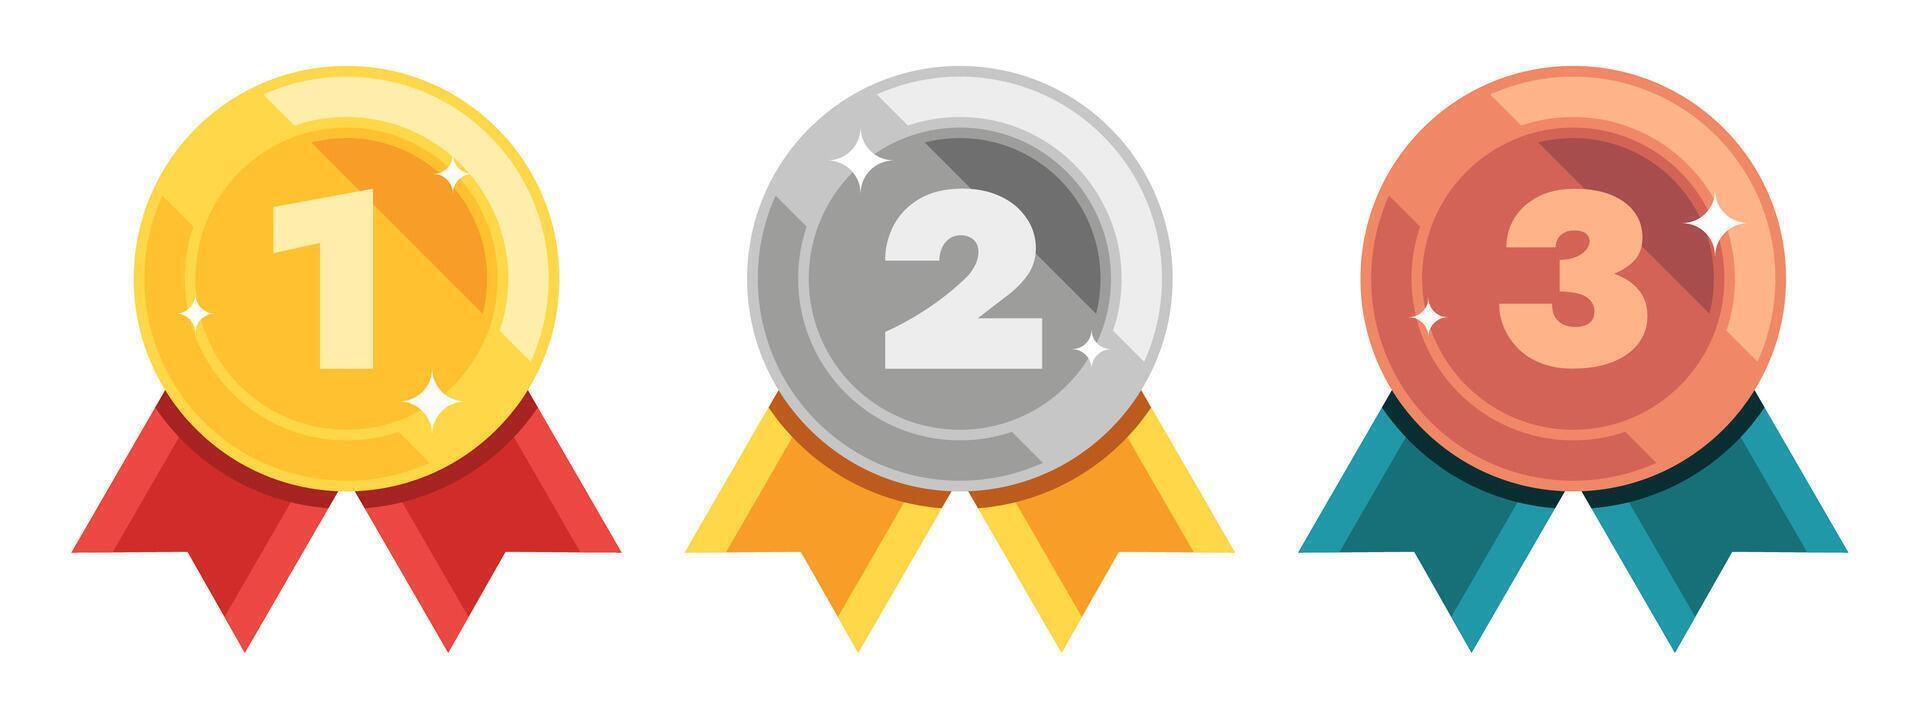 Golden silver bronze award icon. Winner trophy for different places, certificate and ribbon, medal icon for quality certificate. Vector set